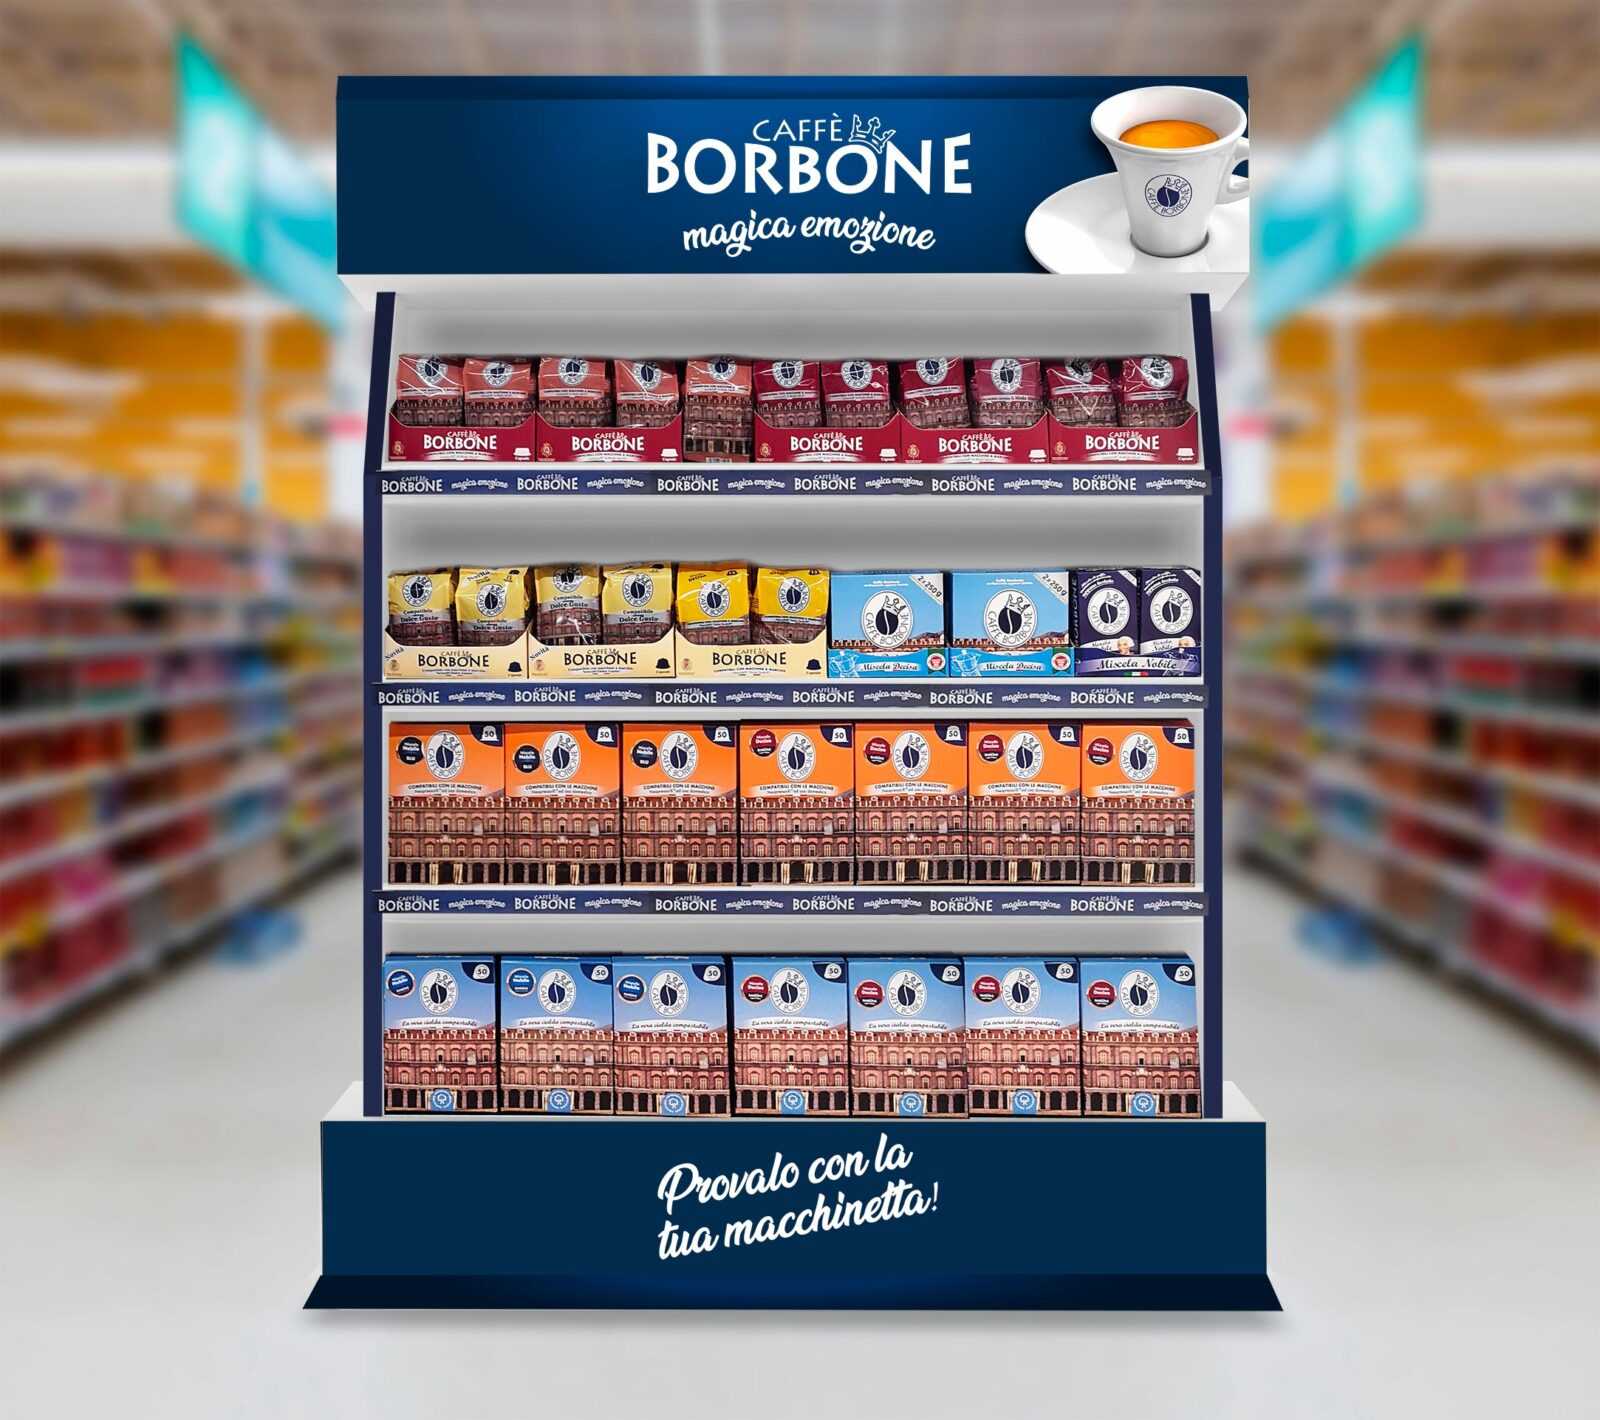 Caffè Borbone reports strong growth in 2020, revenue of €219.3m (+27%)